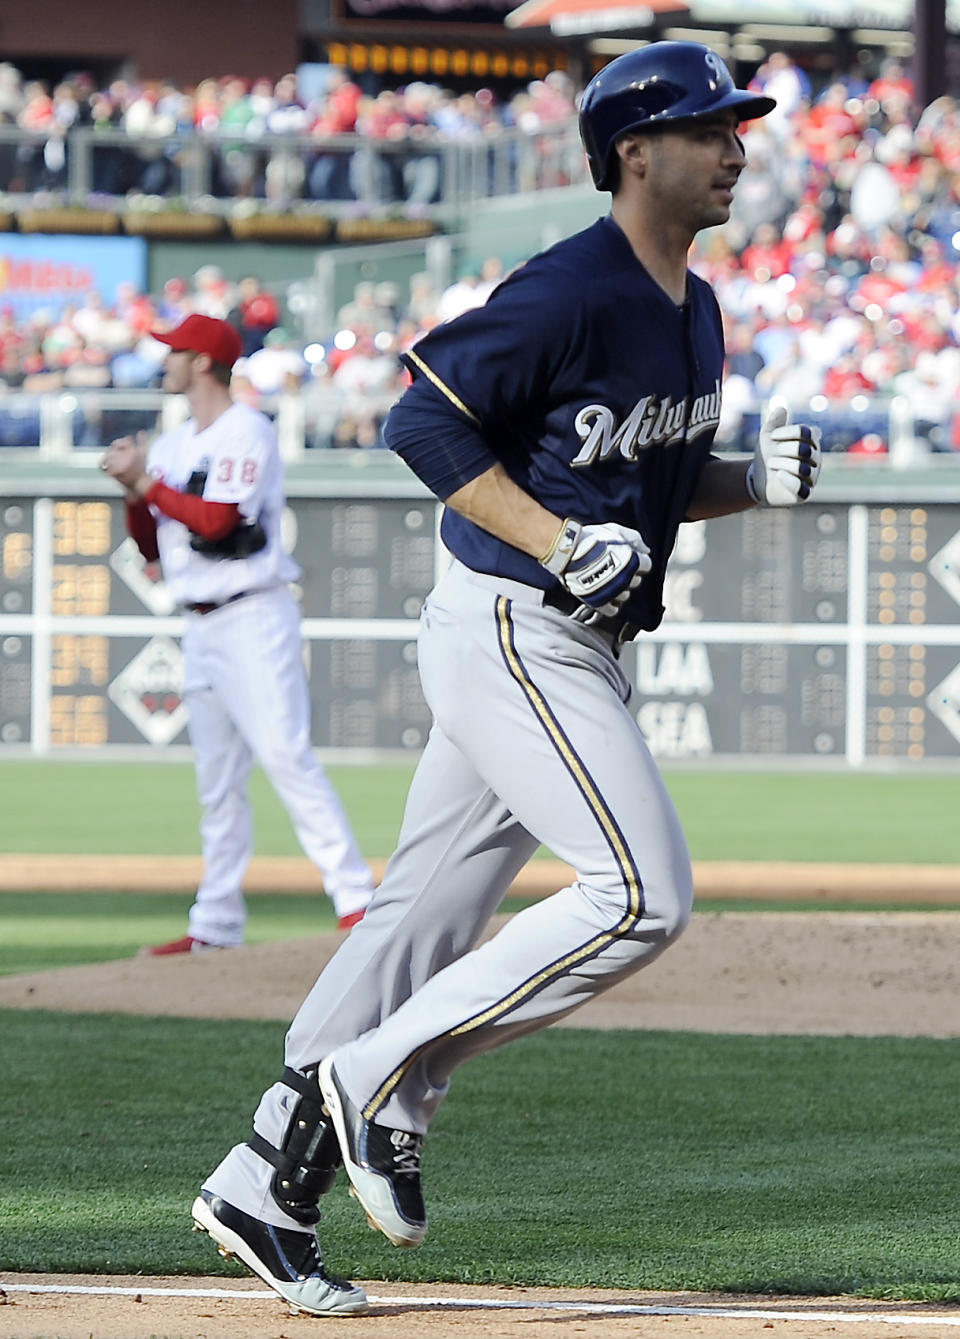 Milwaukee Brewers' Ryan Braun rounds the bases after hitting a three-run home run in the third inning of a baseball game Tuesday, April 8, 2014, in Philadelphia. (AP Photo/Michael Perez)